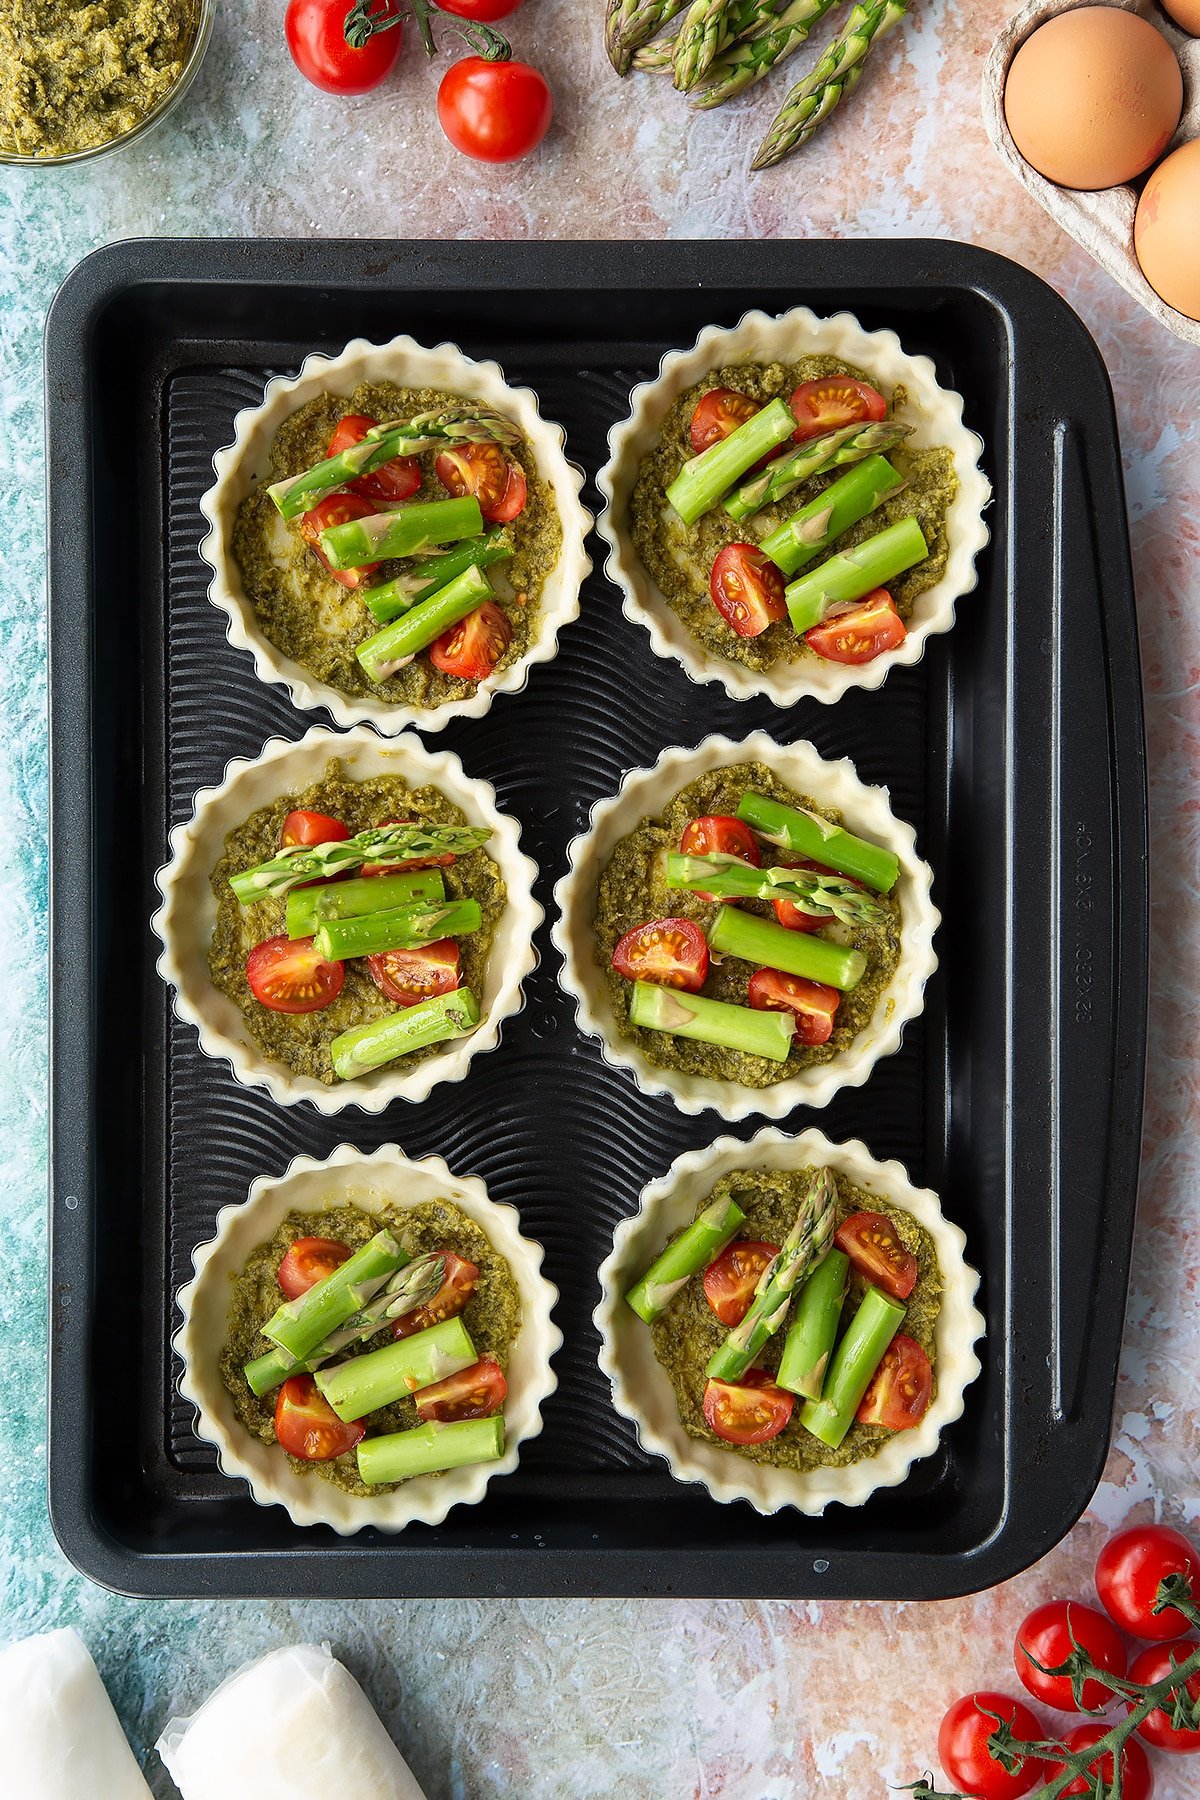 Six tartlet tins on a baking tray. Pastry is fitted and trimmed in the tins. The bottoms are spread with pesto and topped with cherry tomato and asparagus pieces. Ingredients to make asparagus tartlets surround the tray.